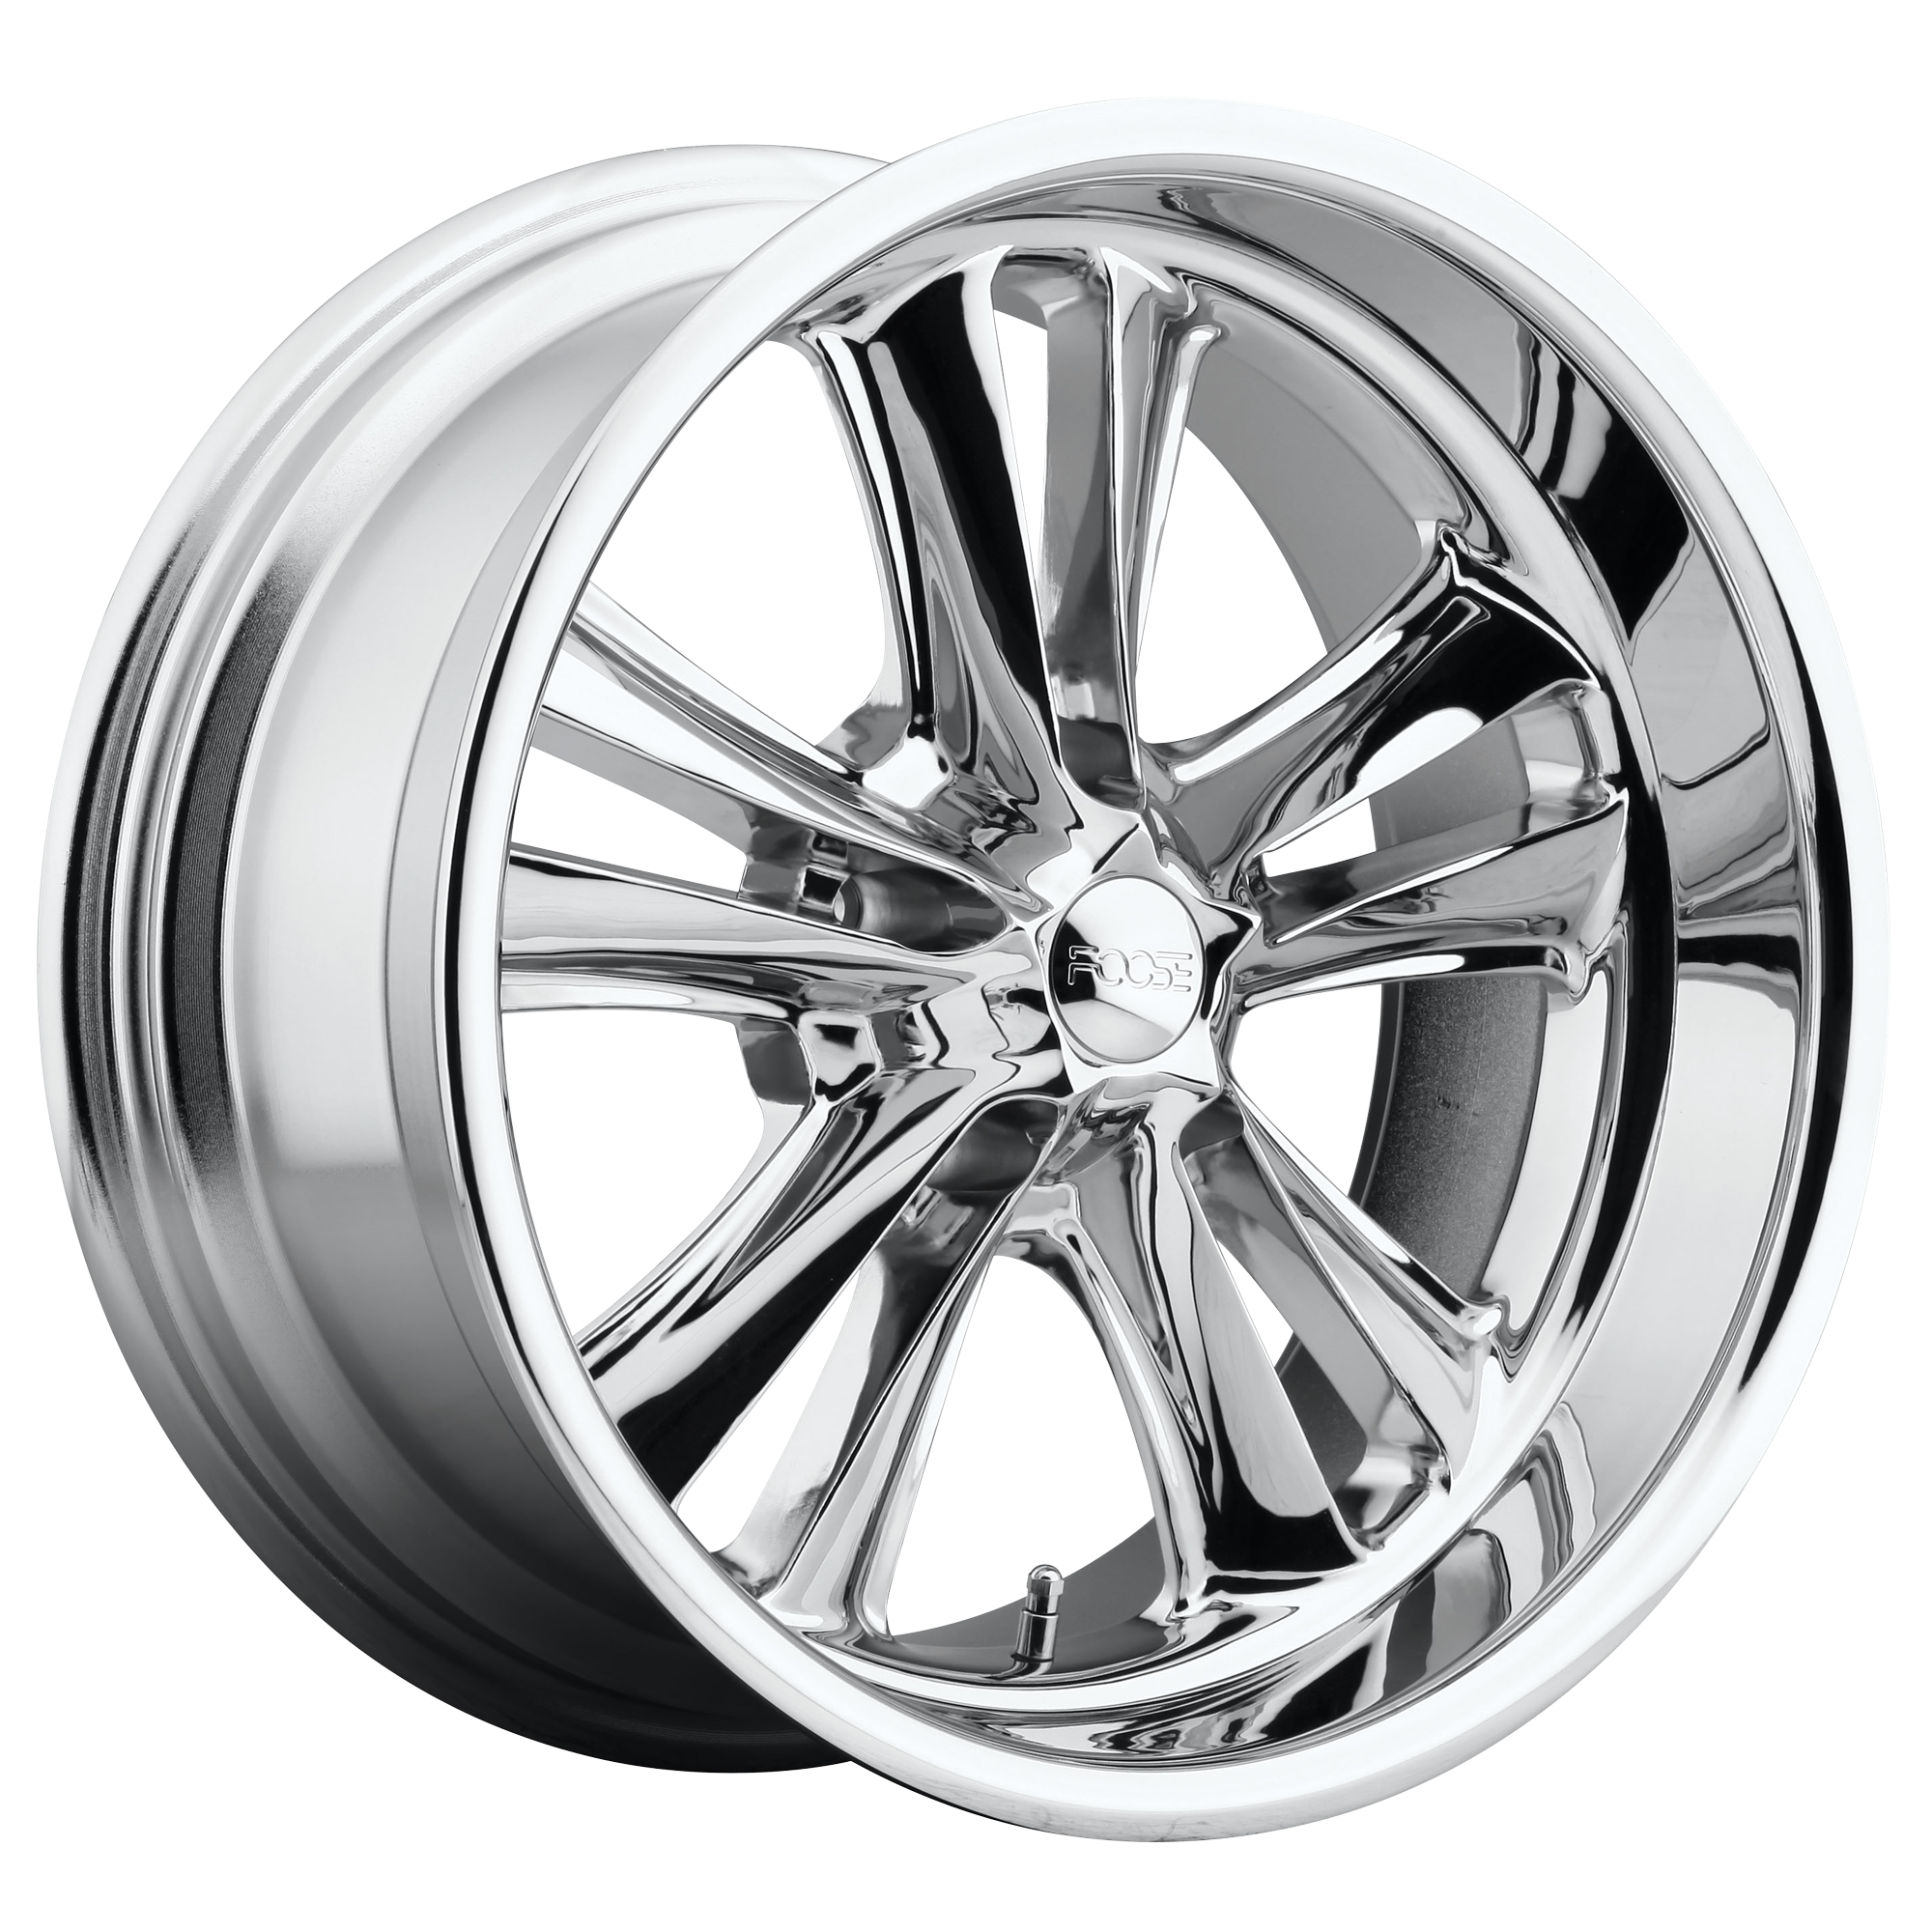 KNUCKLE 17x7 5x114.30 CHROME PLATED (1 mm) - Tires and Engine Performance